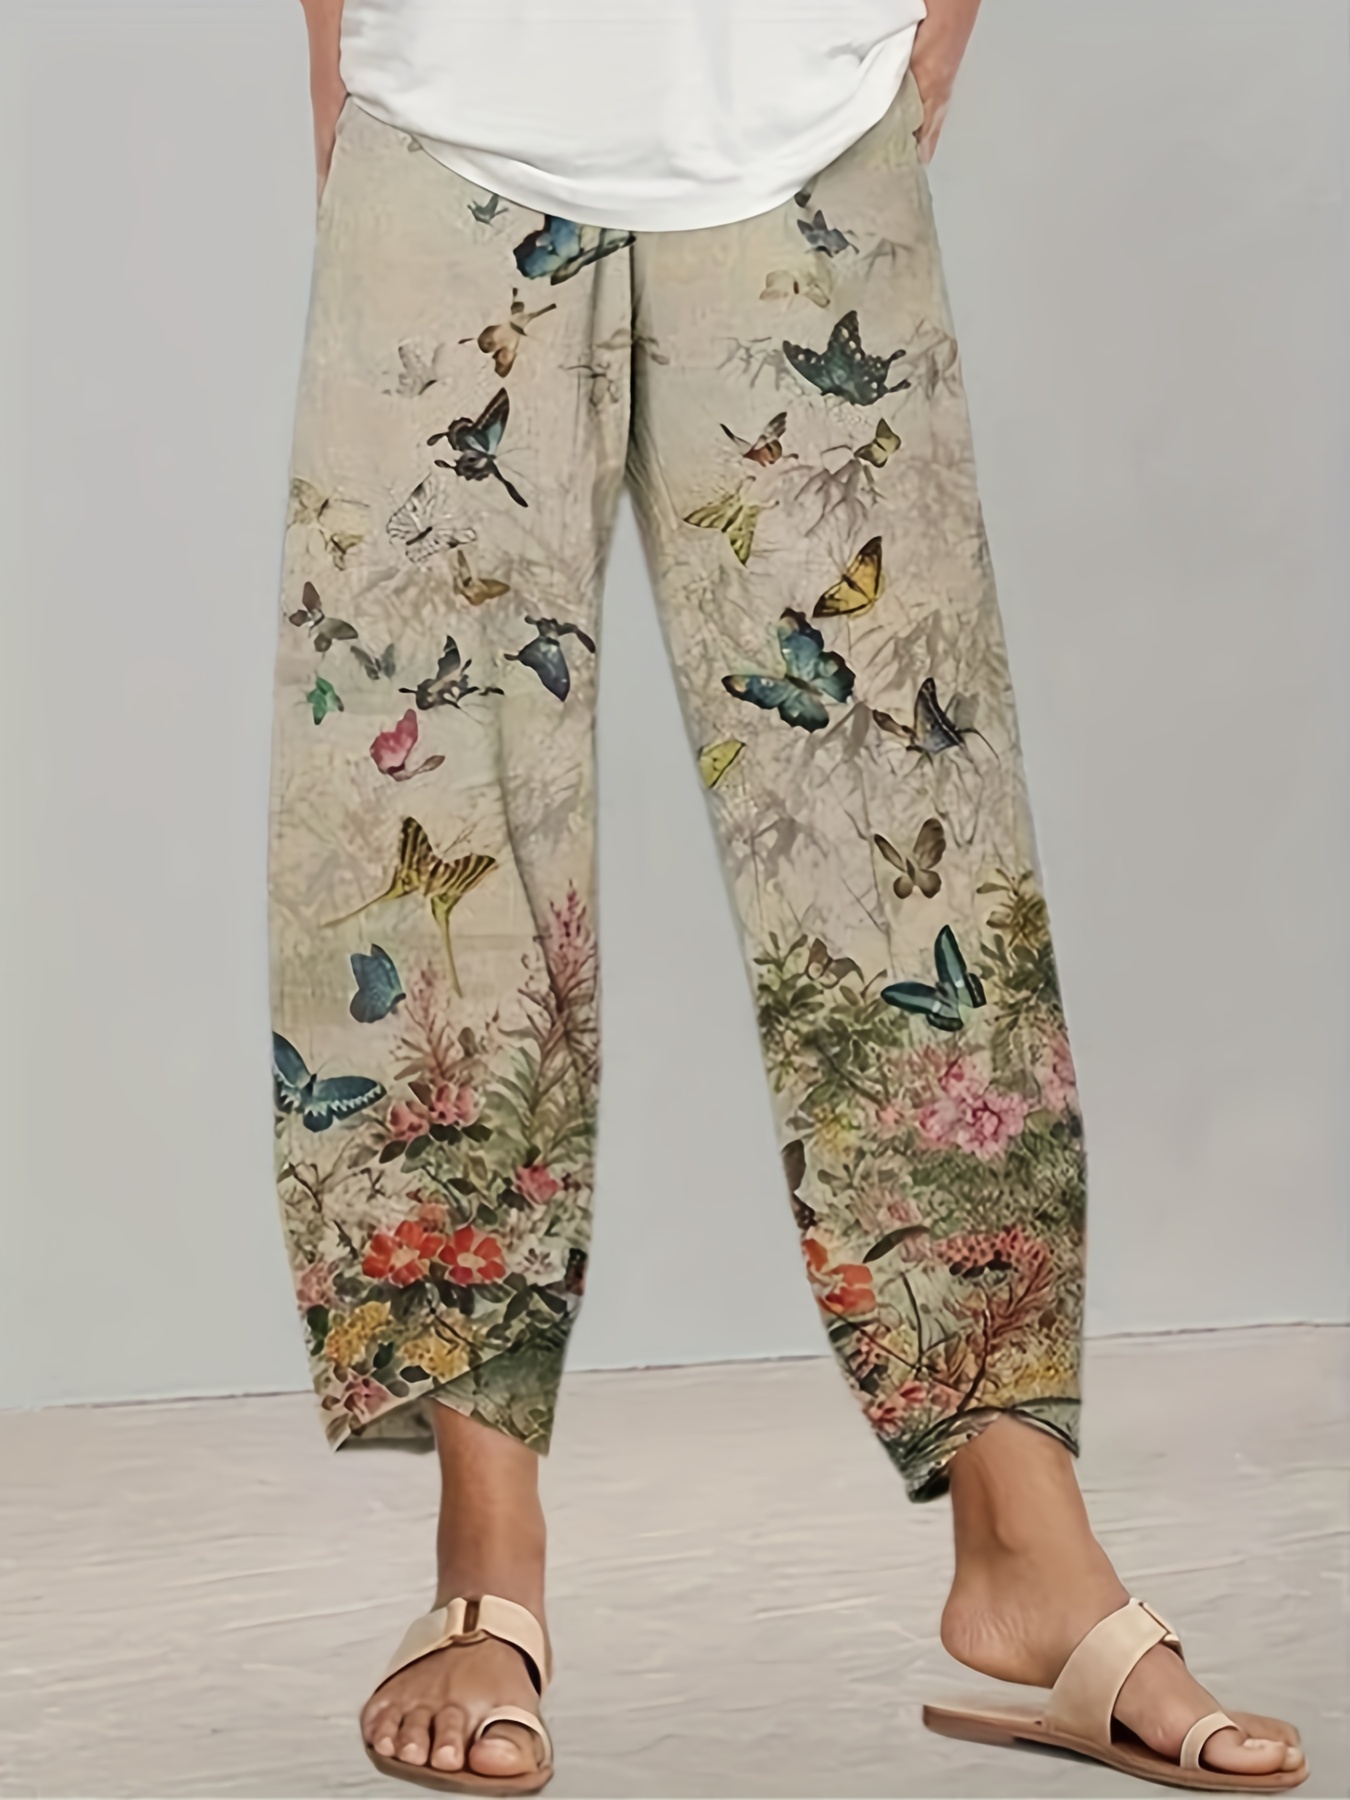 Women Floral Printed Comfy Trousers Casual Long Pants